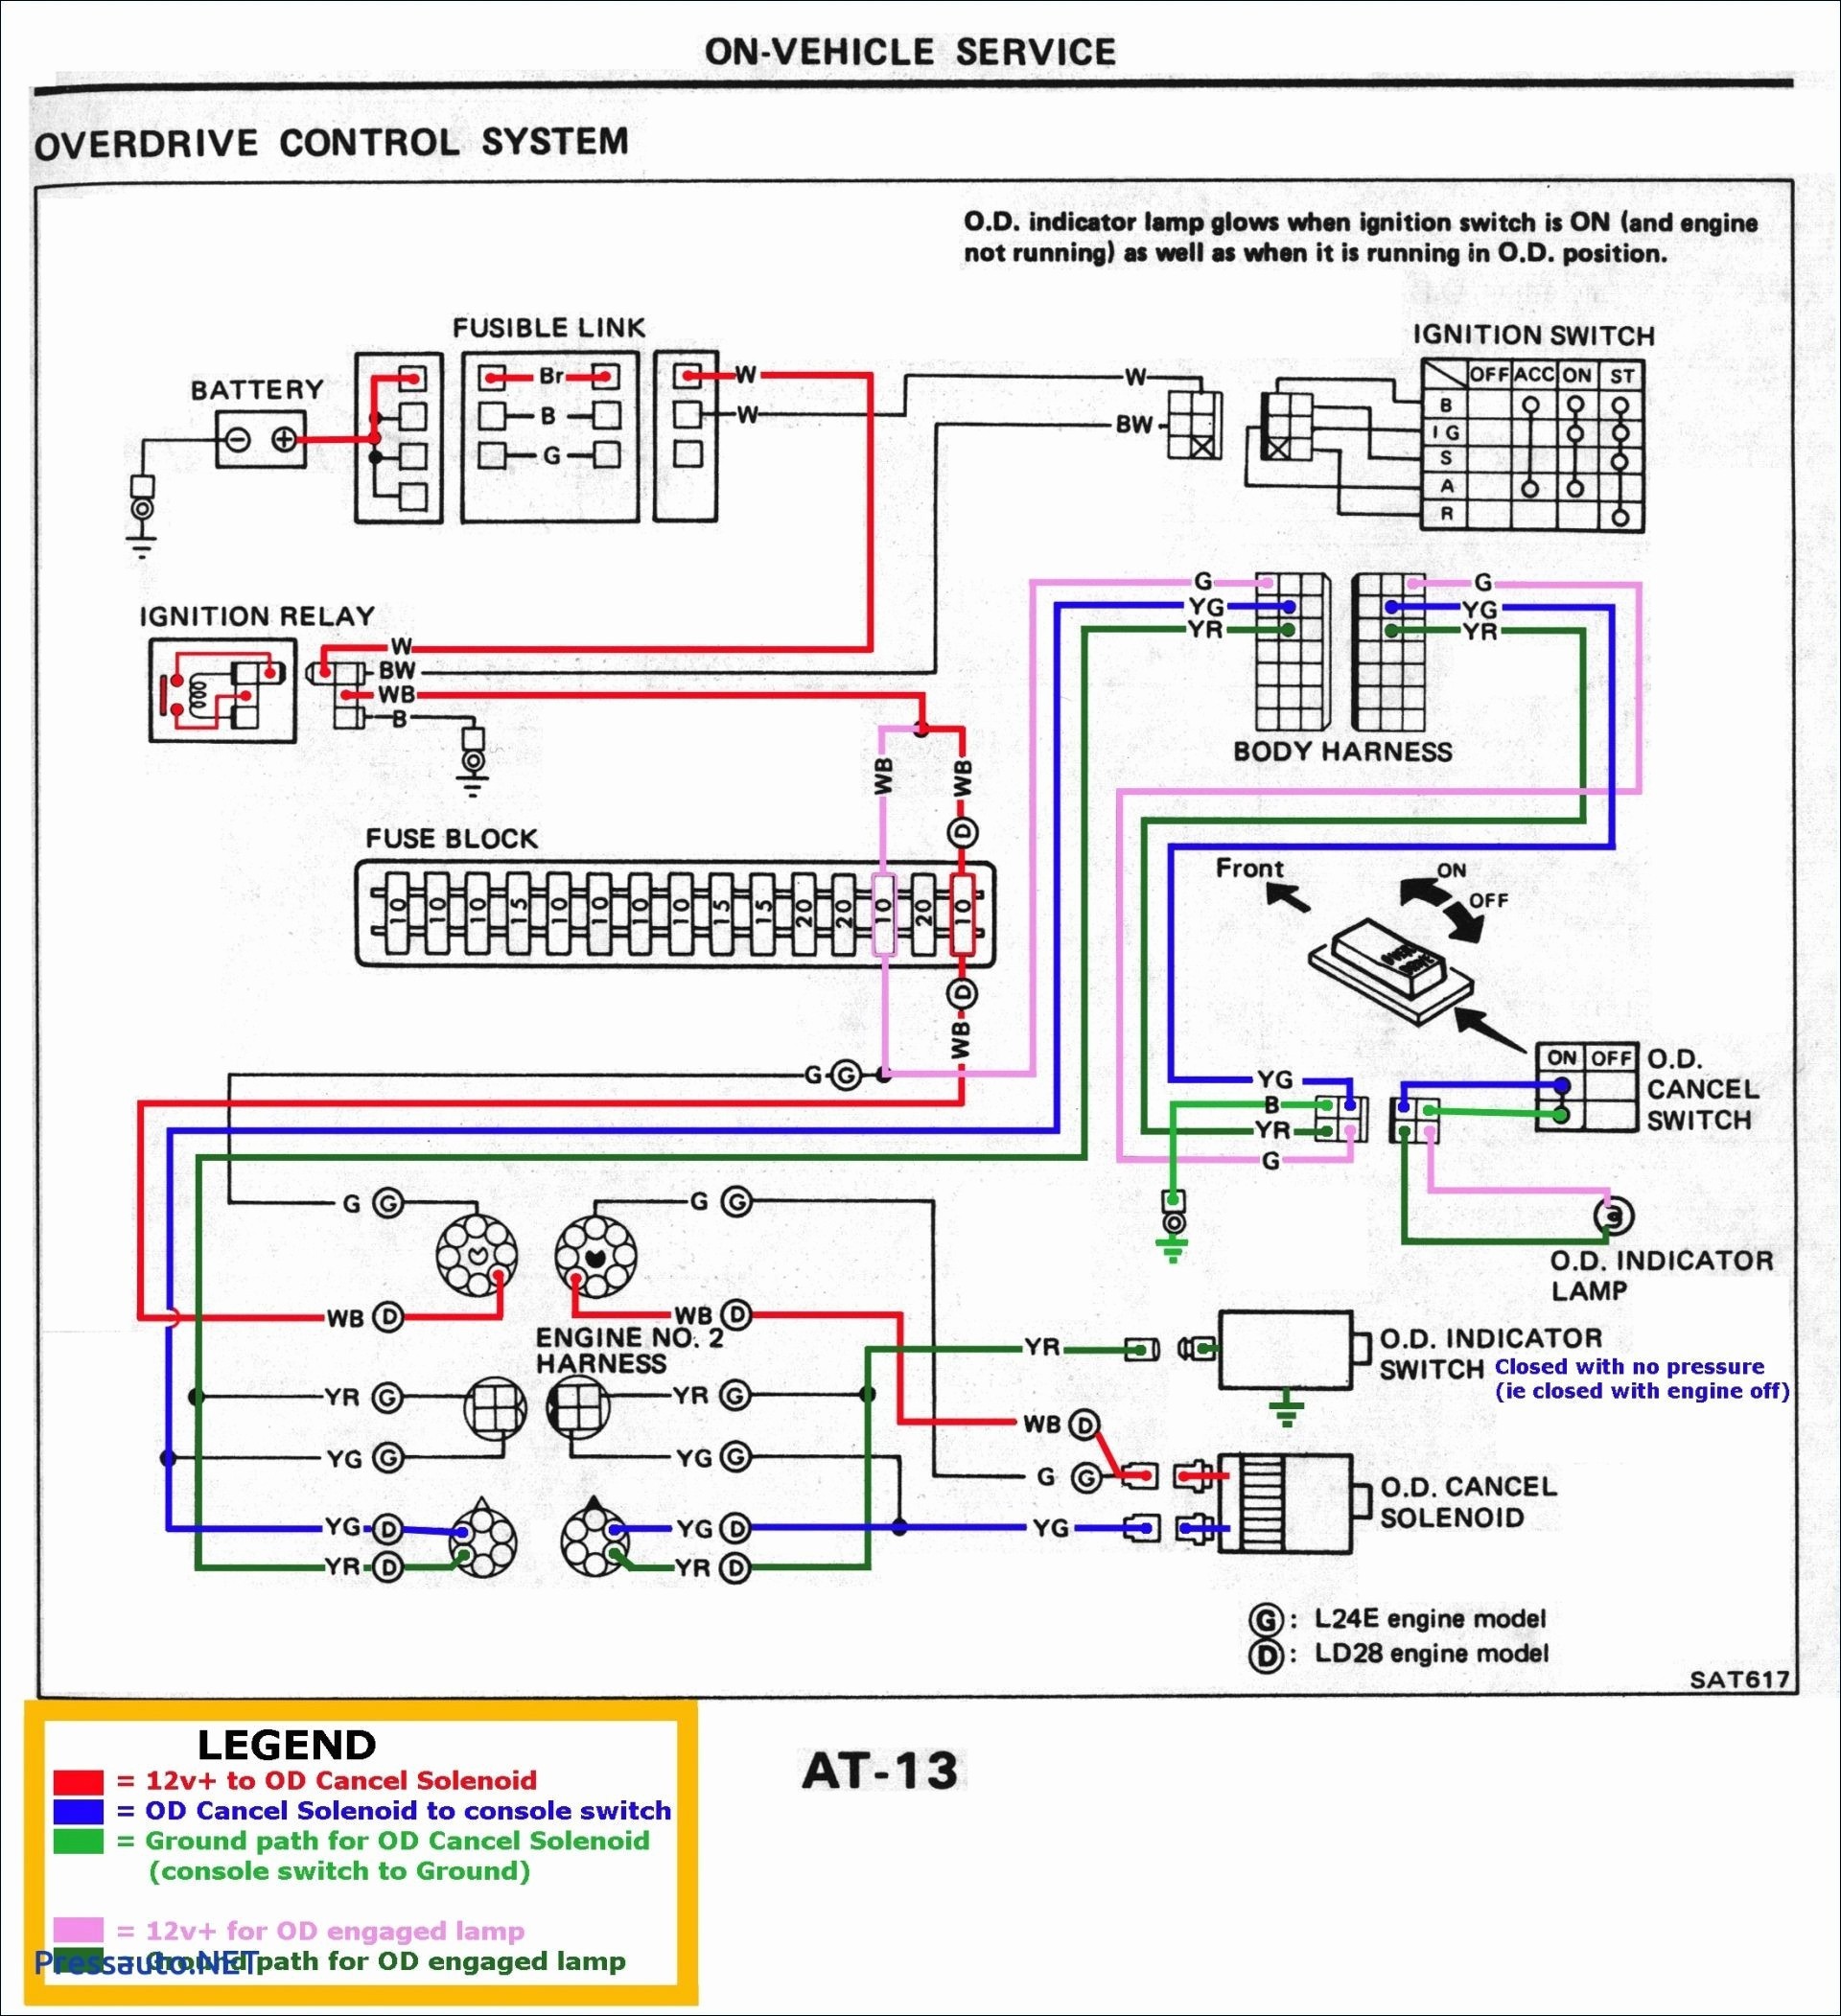 1981 Chevy Truck Fuse Box Diagram 84 Camaro Fuse Box Another Blog About Wiring Diagram • Of 1981 Chevy Truck Fuse Box Diagram